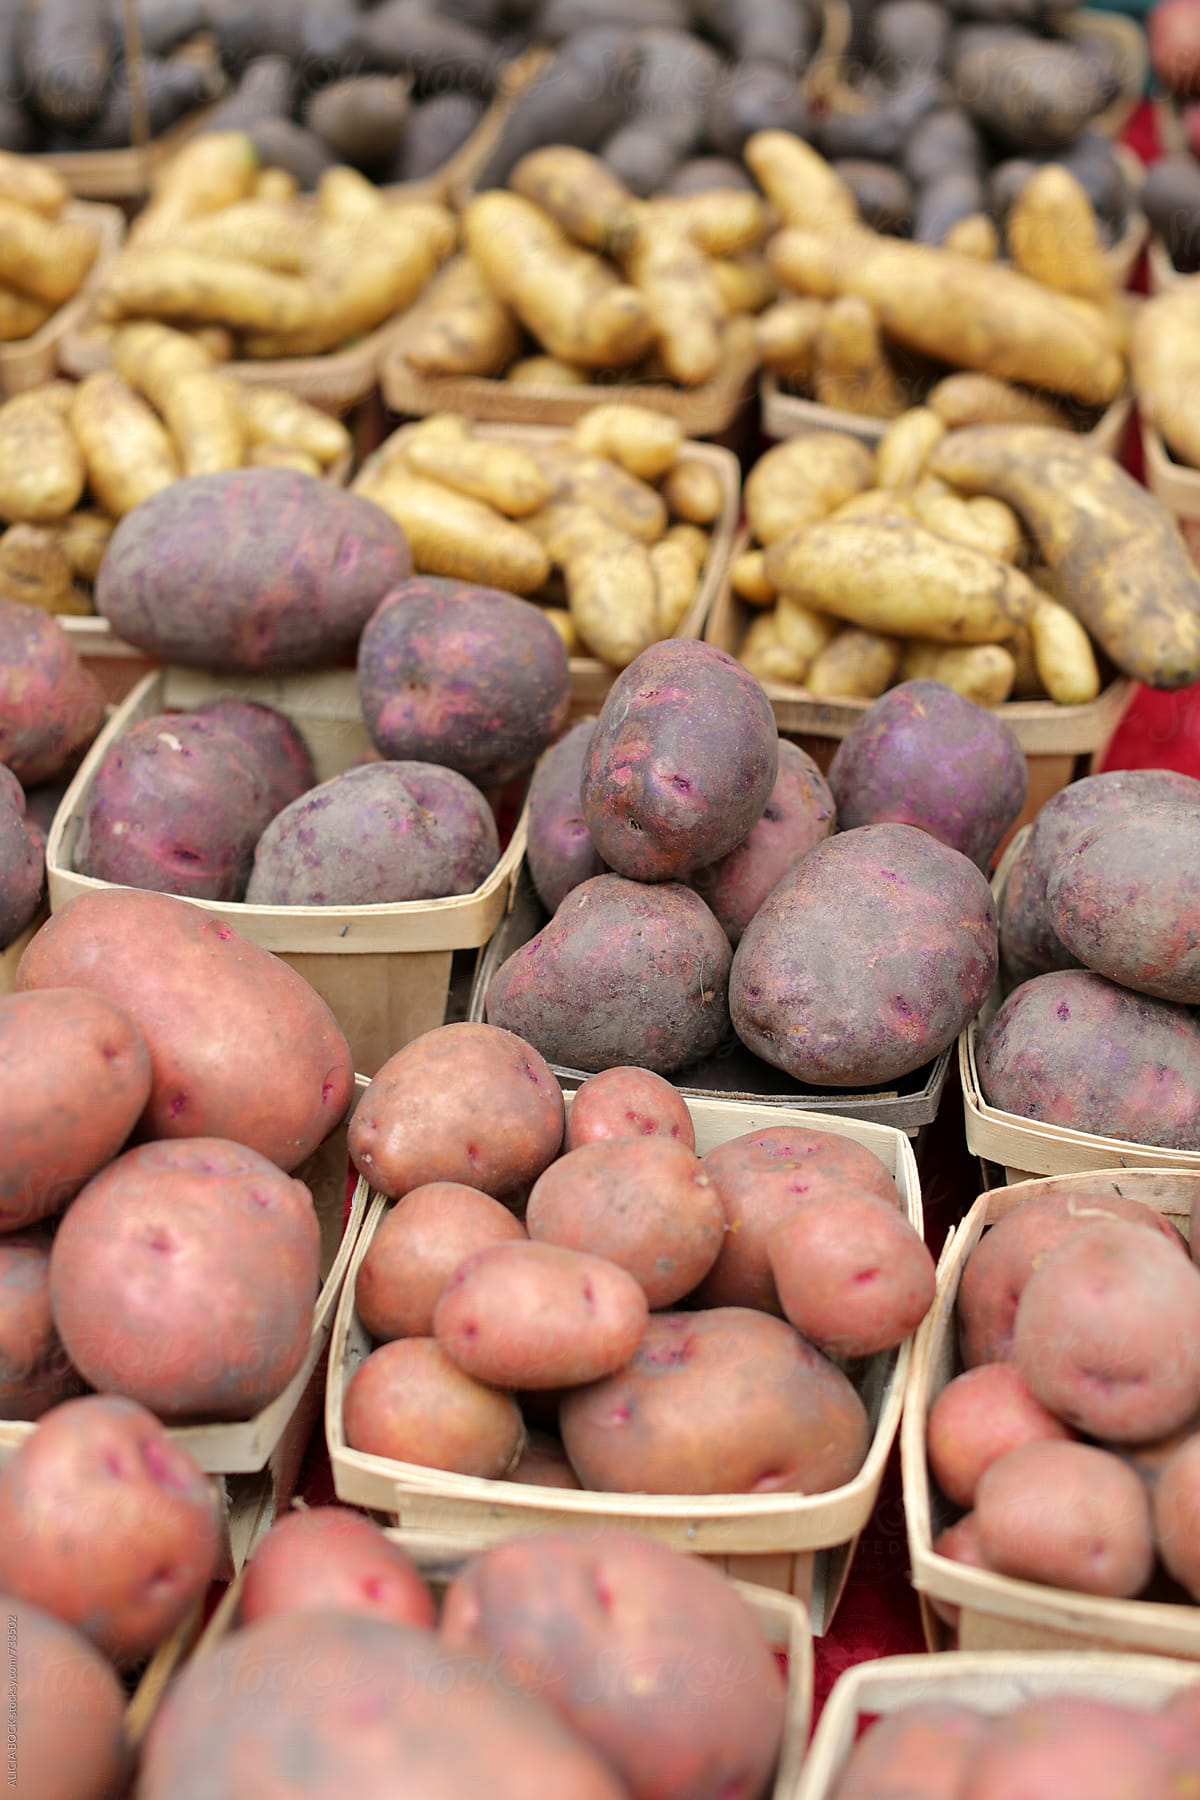 Rows Of Colorful Potatoes For Sale At A Farmer\'s Market